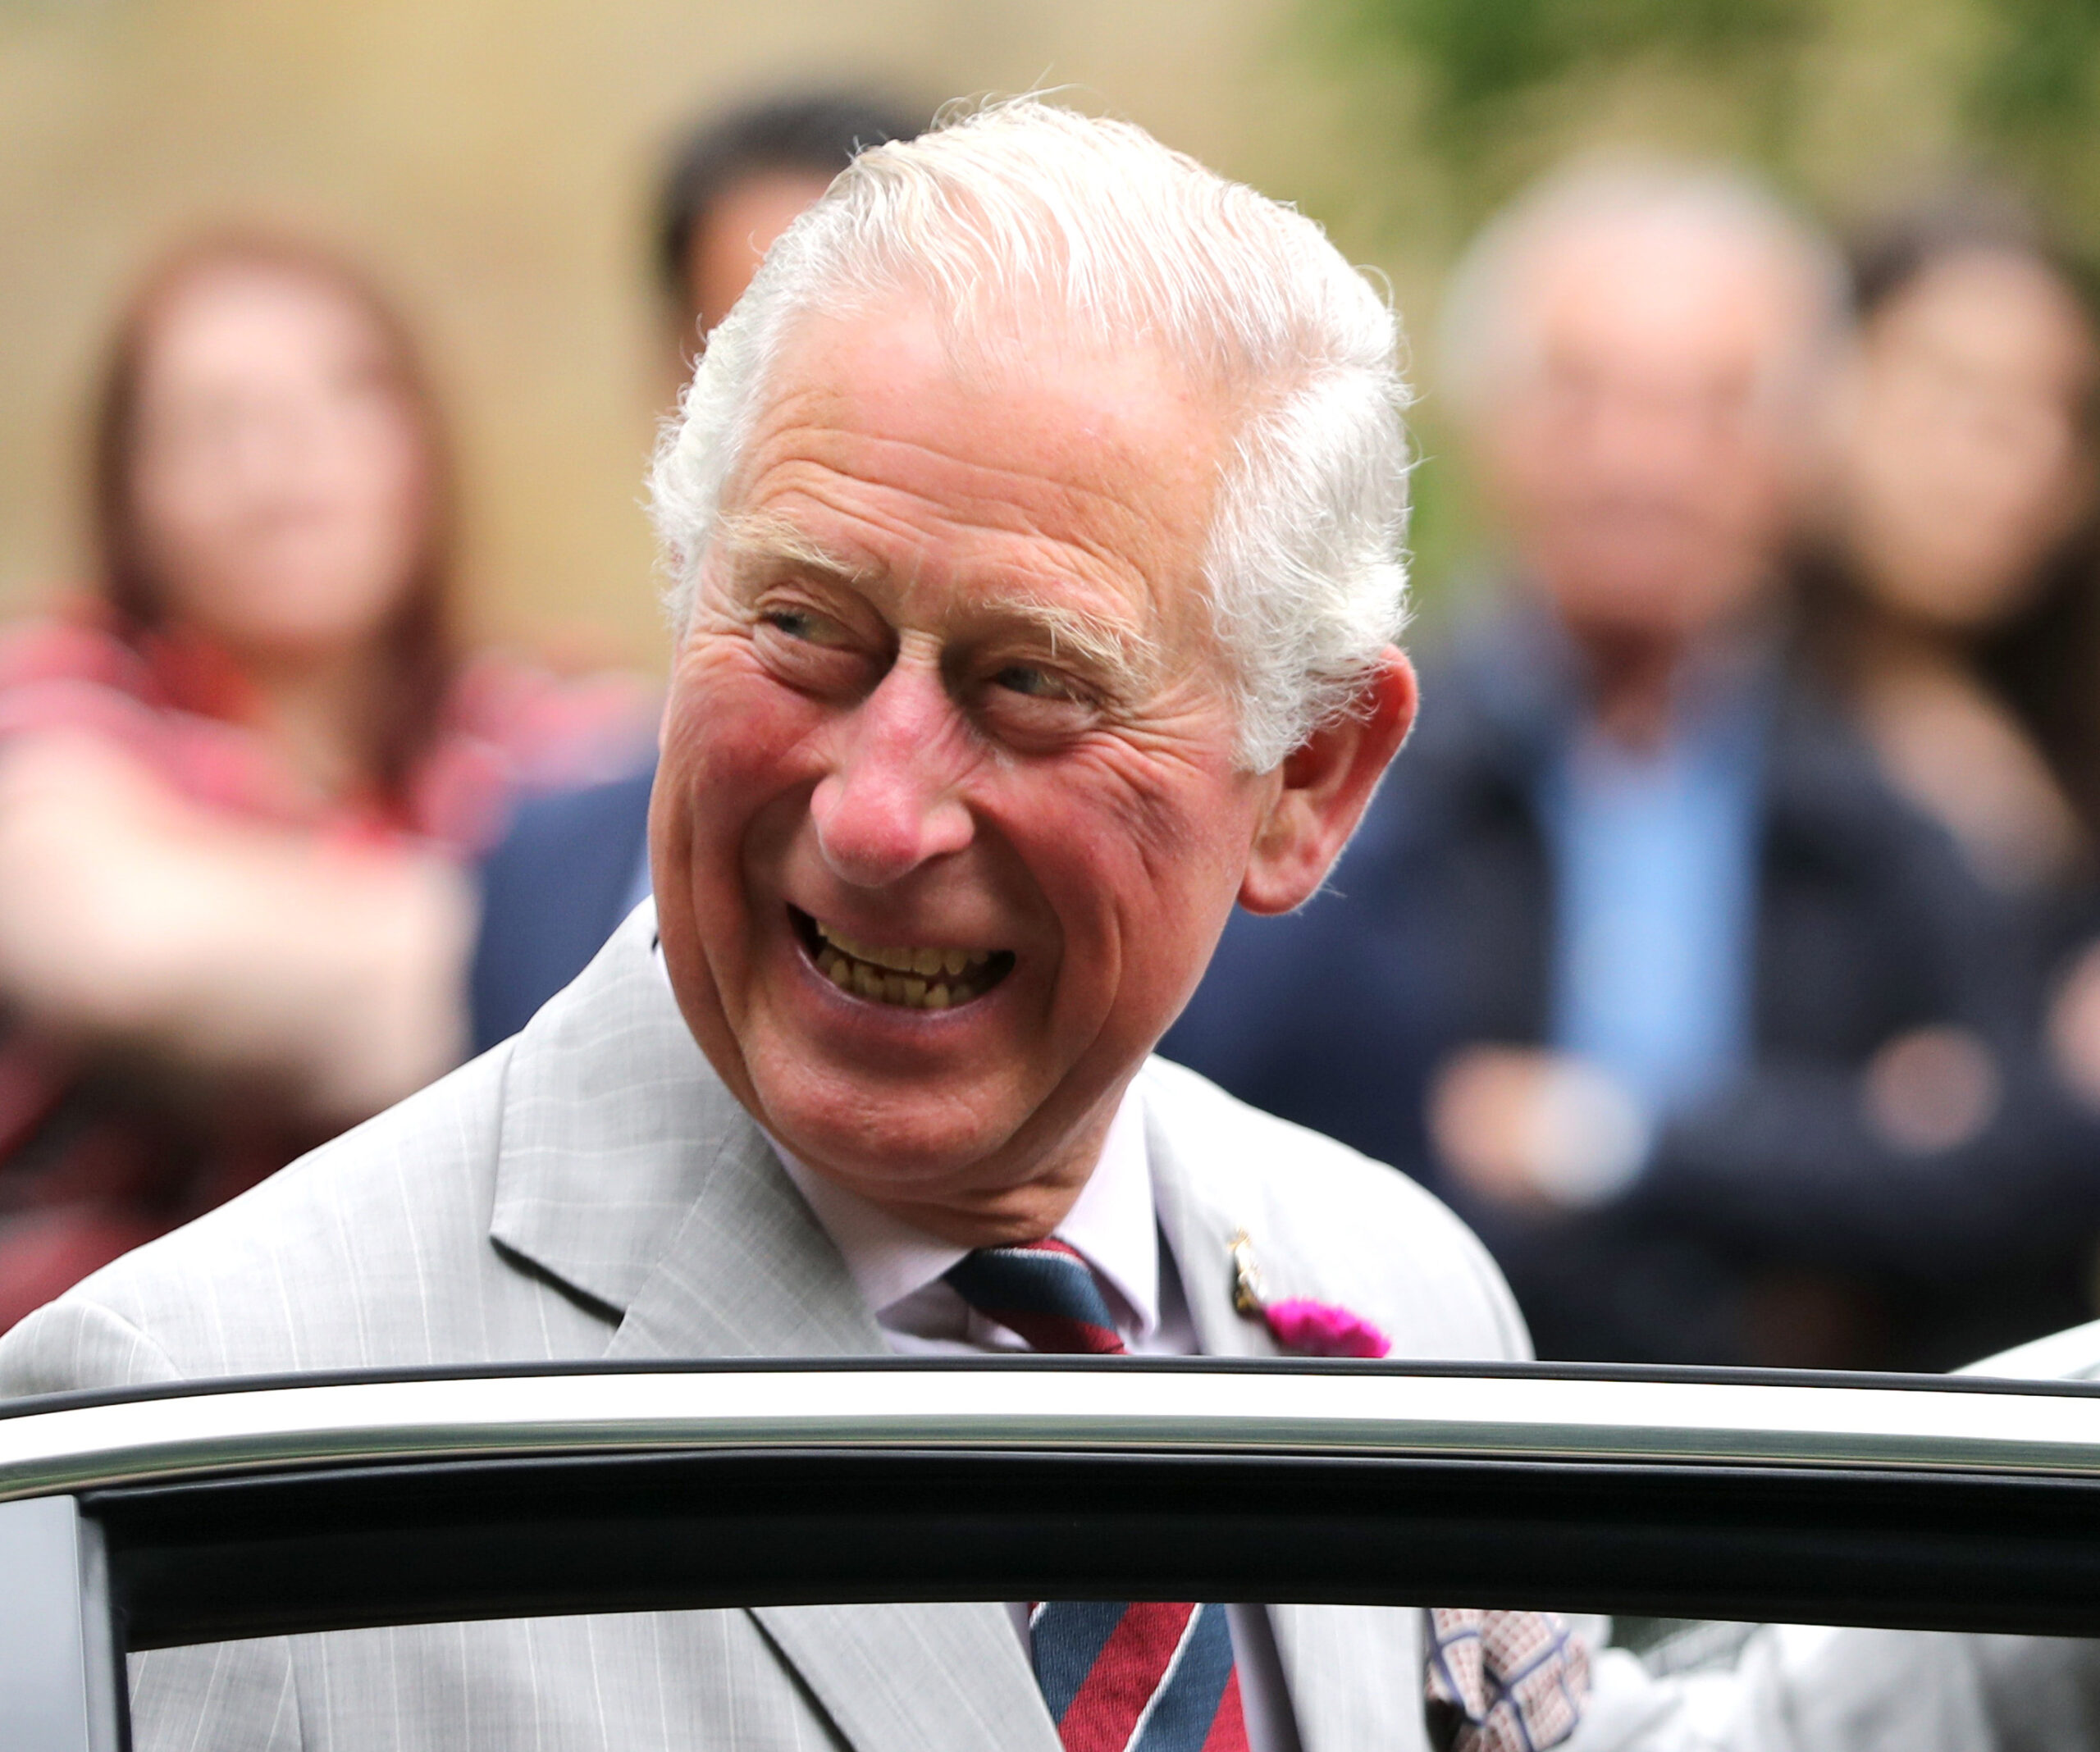 AMAZING NEW ROYAL PHOTO: Palace releases intimate new portrait of Prince Charles